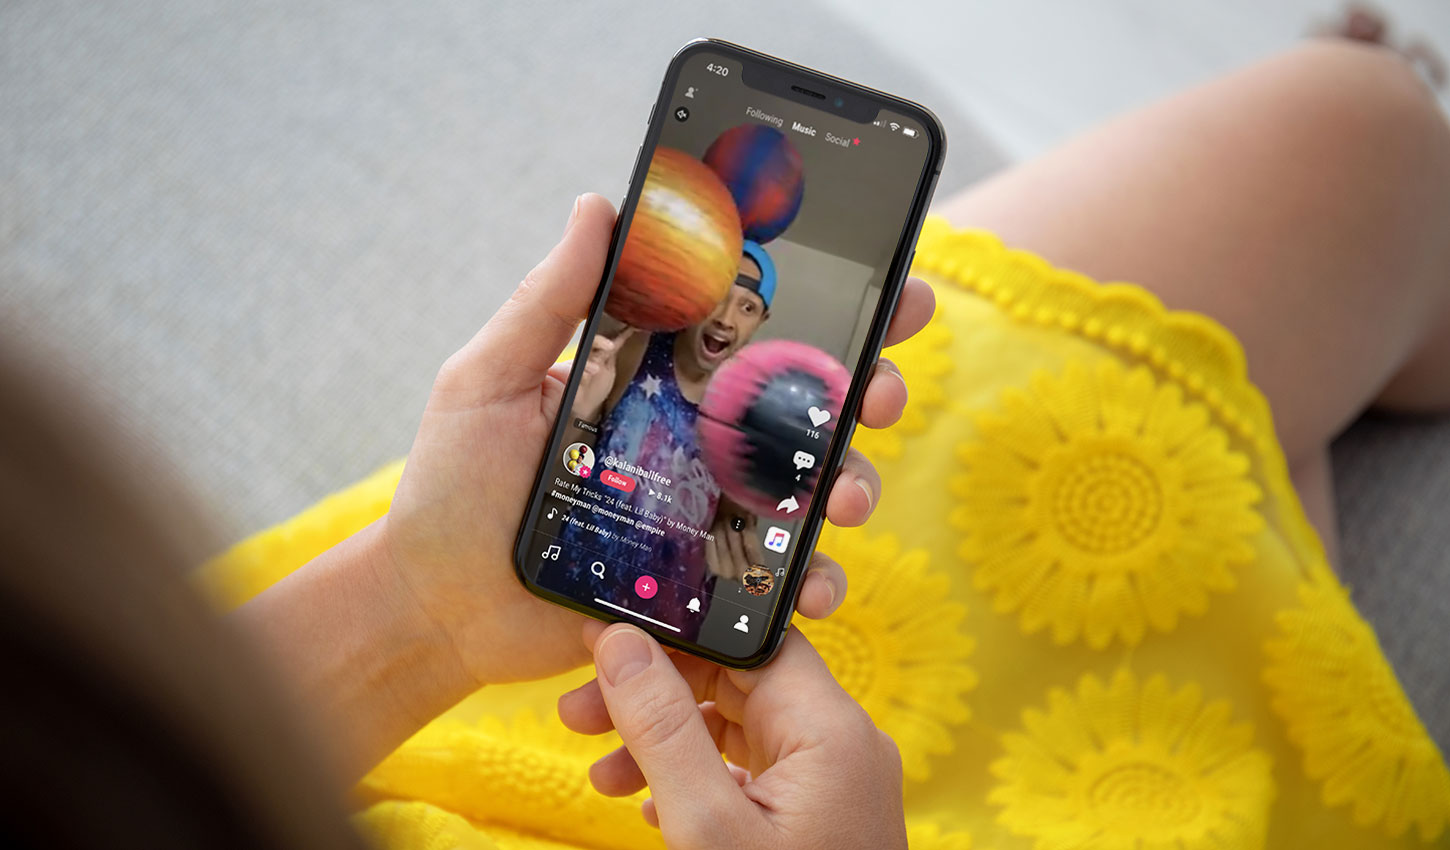 TikTok's competitors collectively saw their MAUs climb 12% in August from the month prior